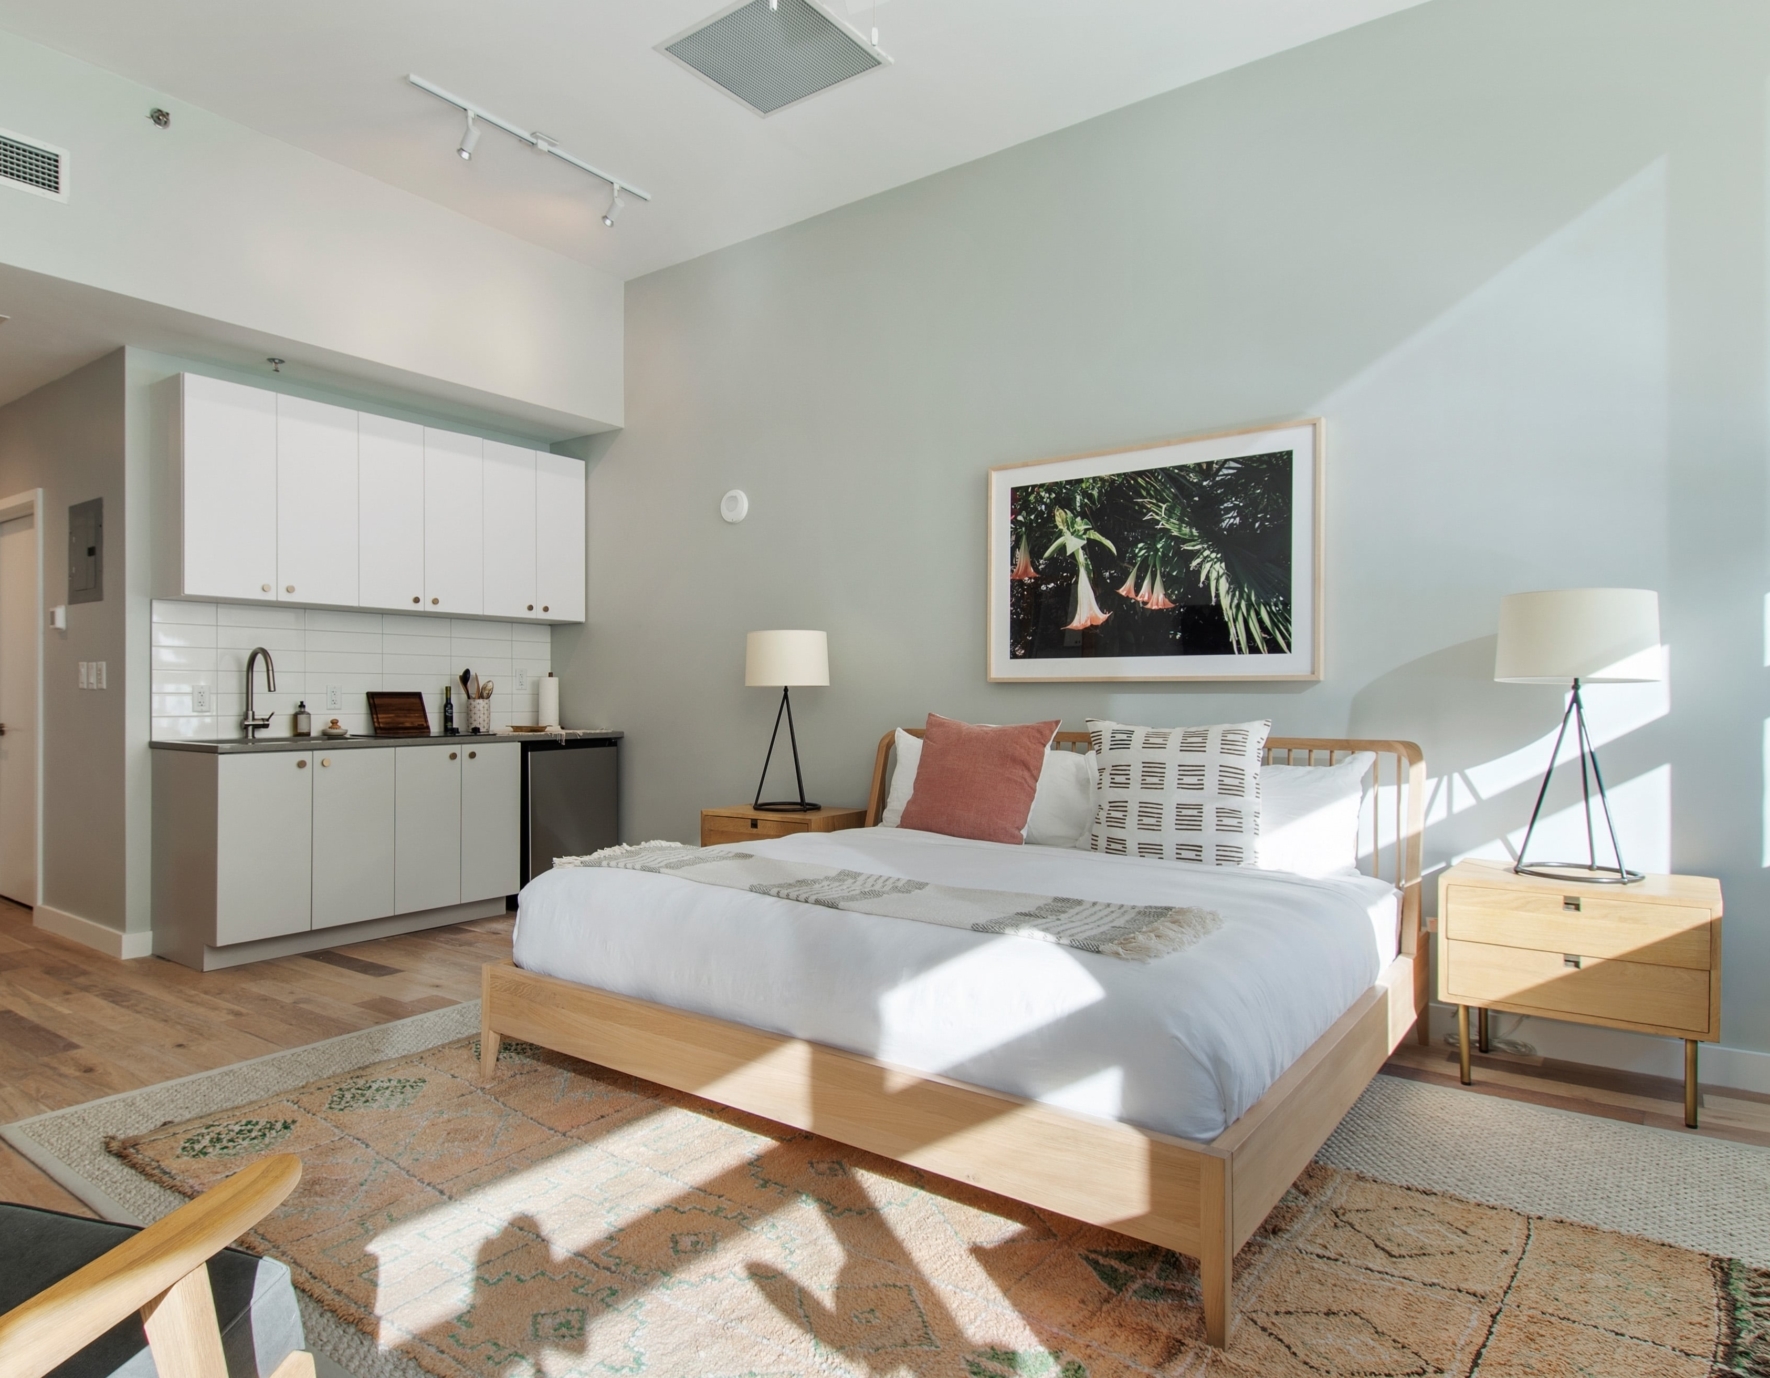 A studio guest suite with a simple kitchen and spacious bedroom space with ample natural light and modern furniture.